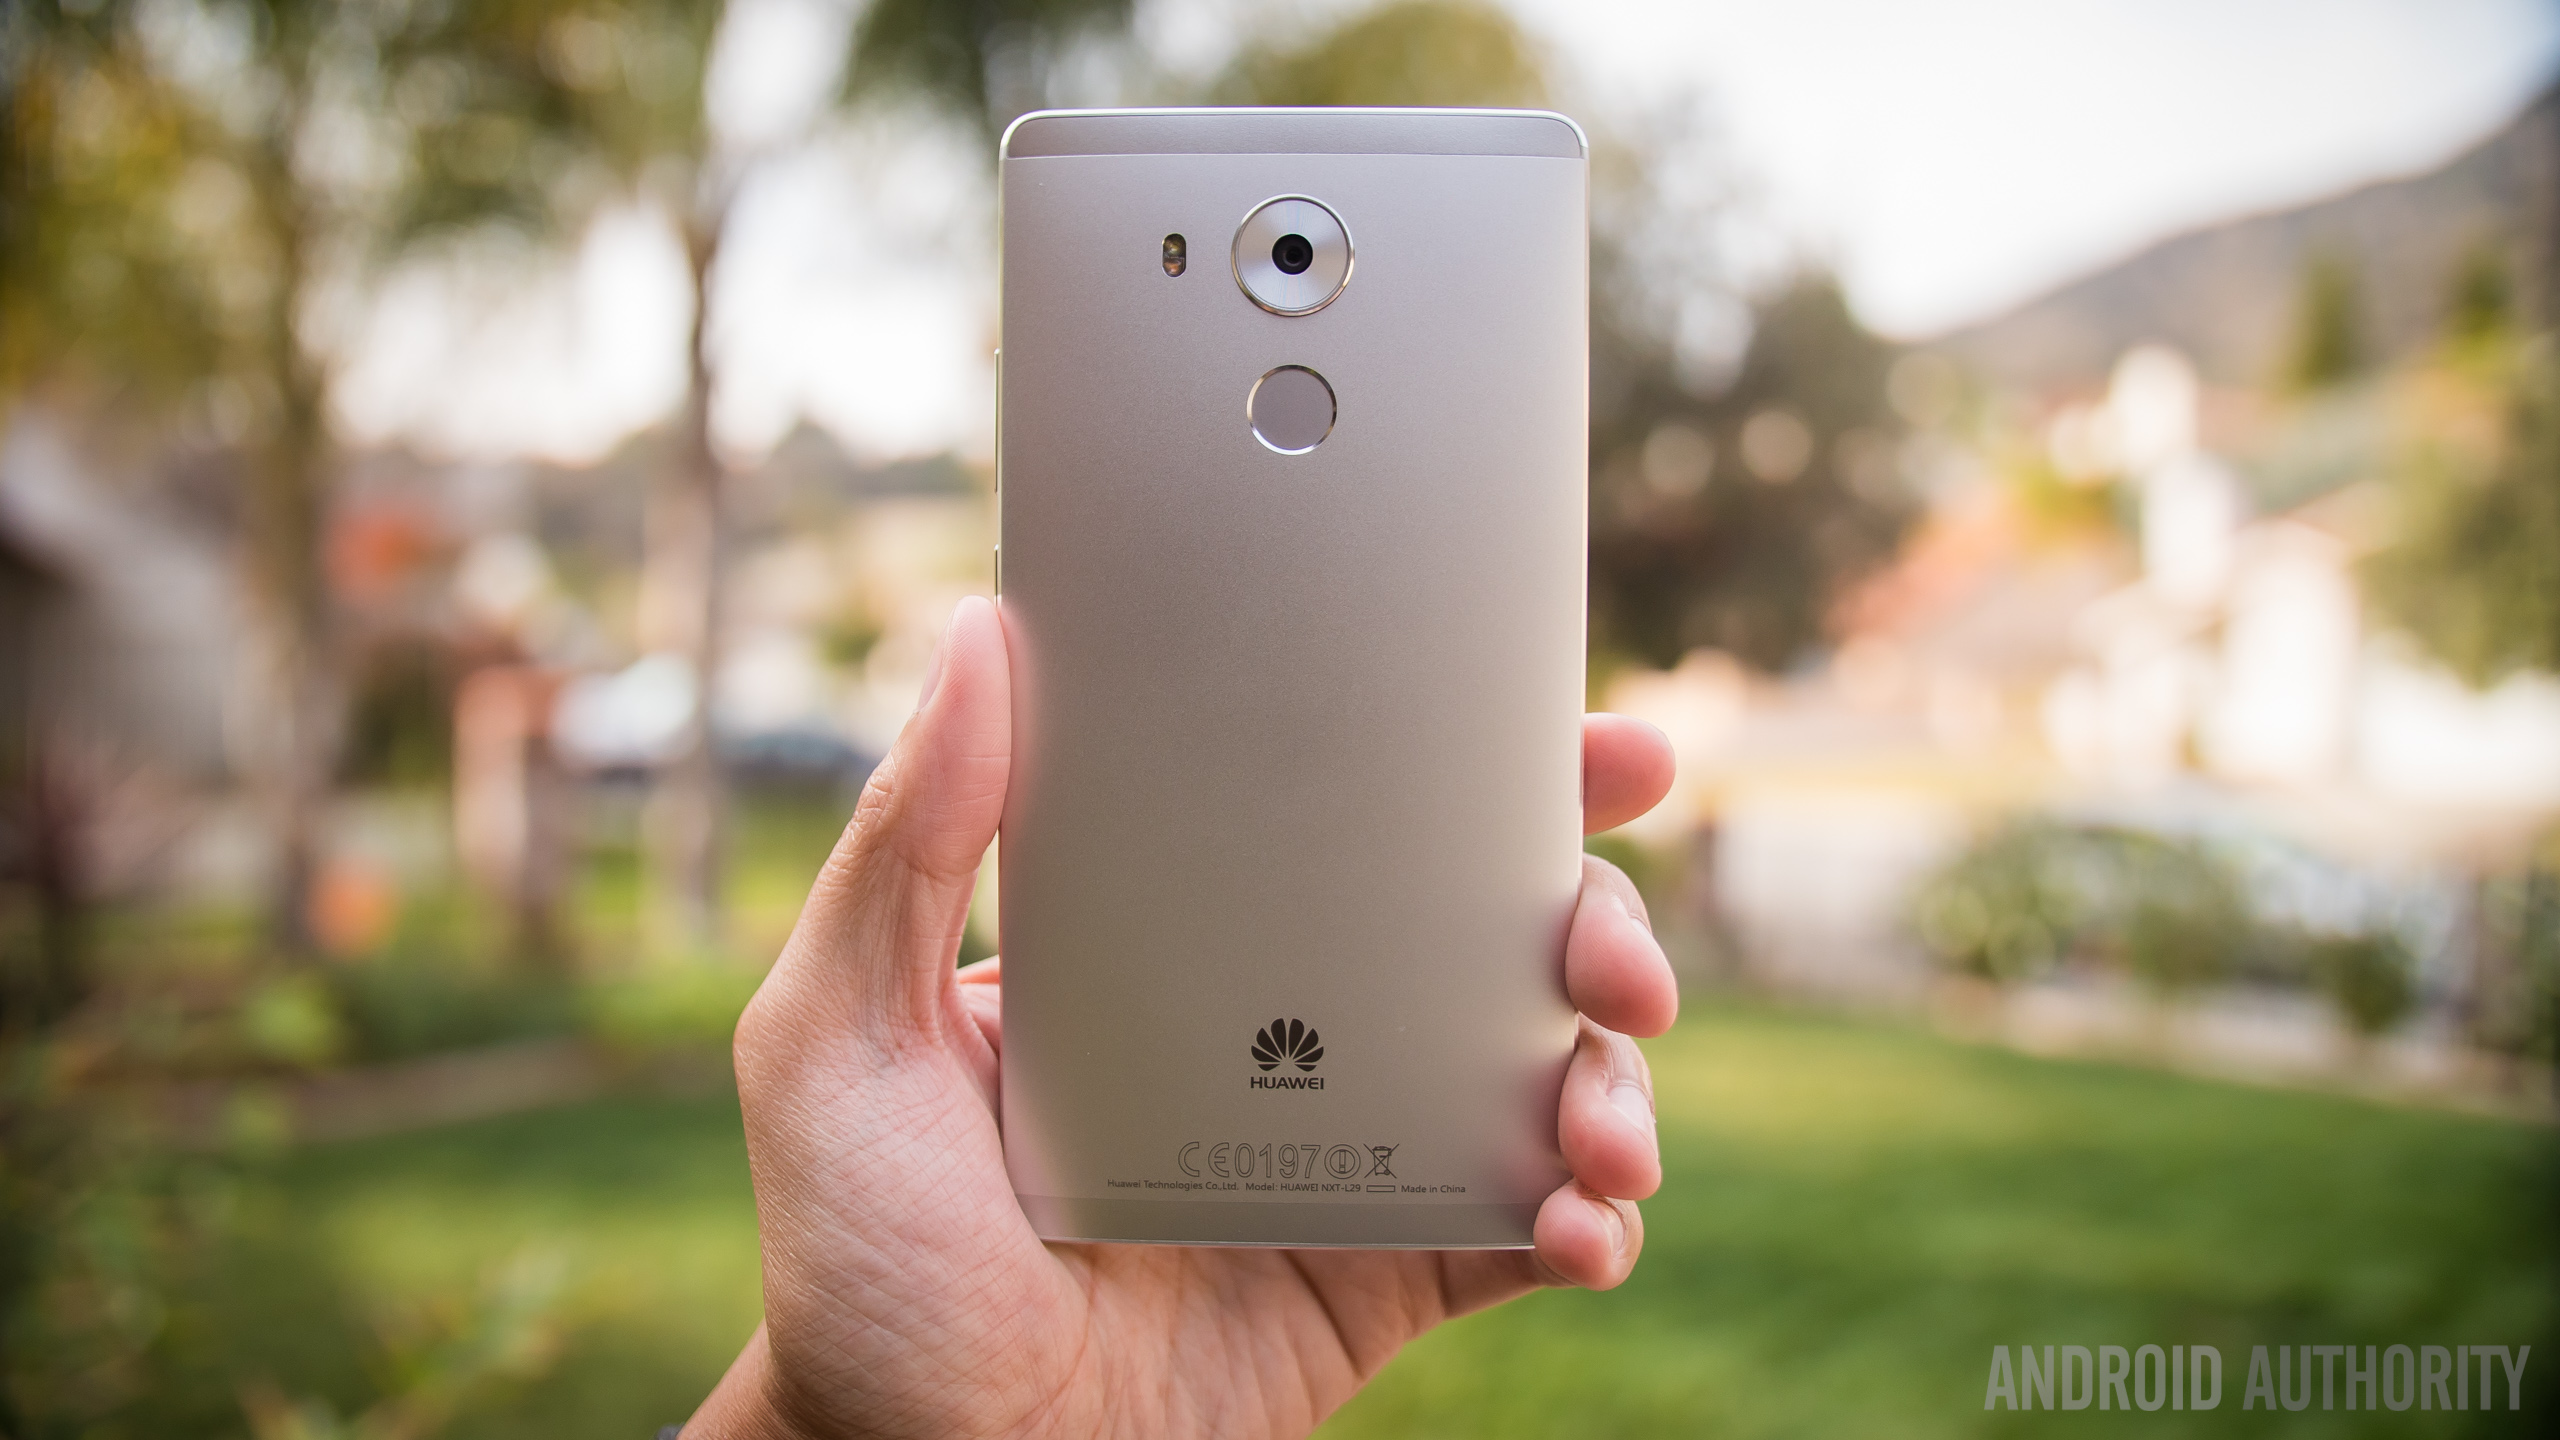 kaart Sinis Junior Upgrading from HUAWEI Mate 7 to Mate 8: what a difference a year makes